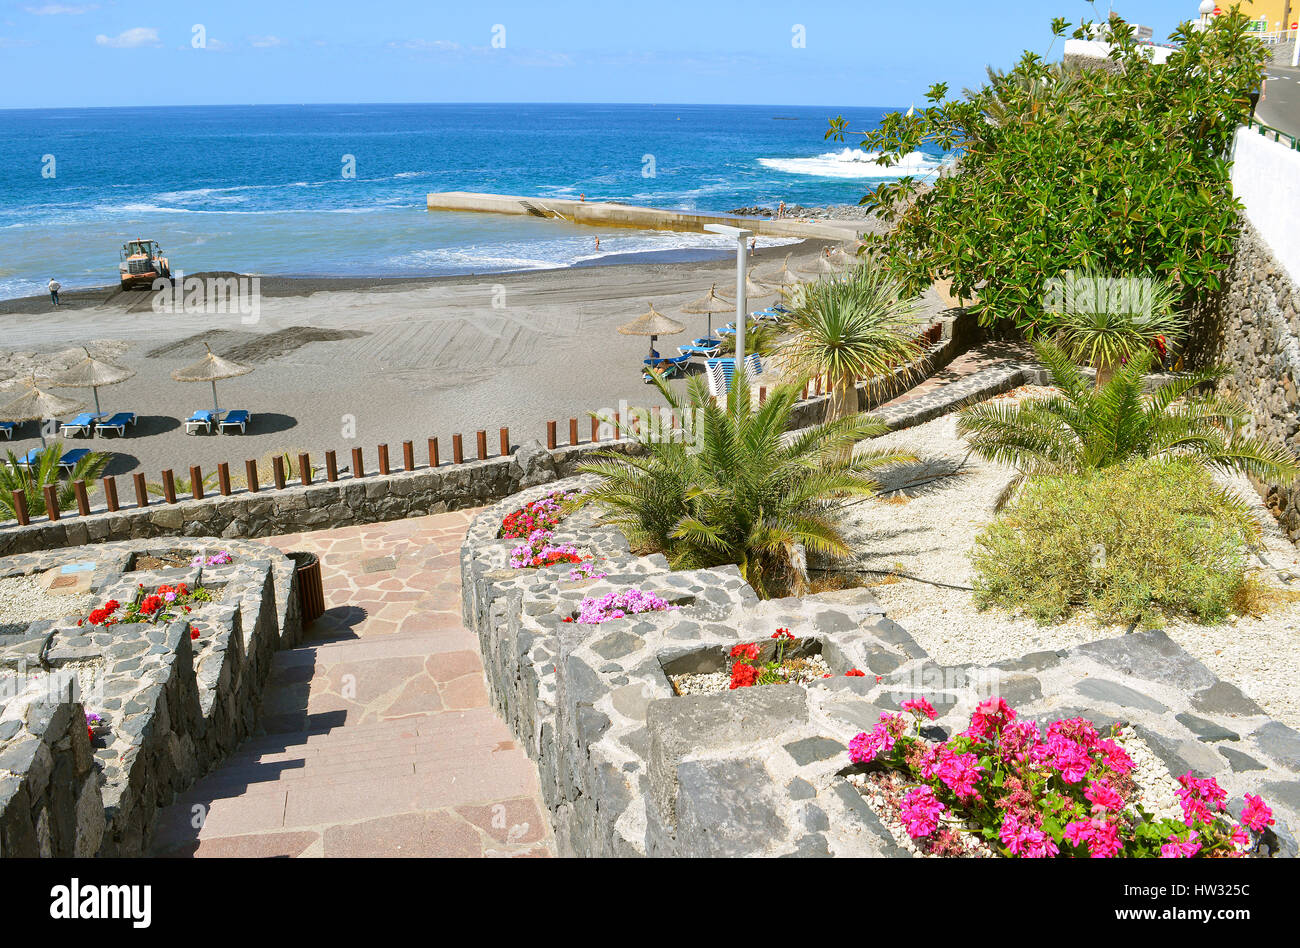 Blue Sea Callao Garden High Resolution Stock Photography and Images - Alamy